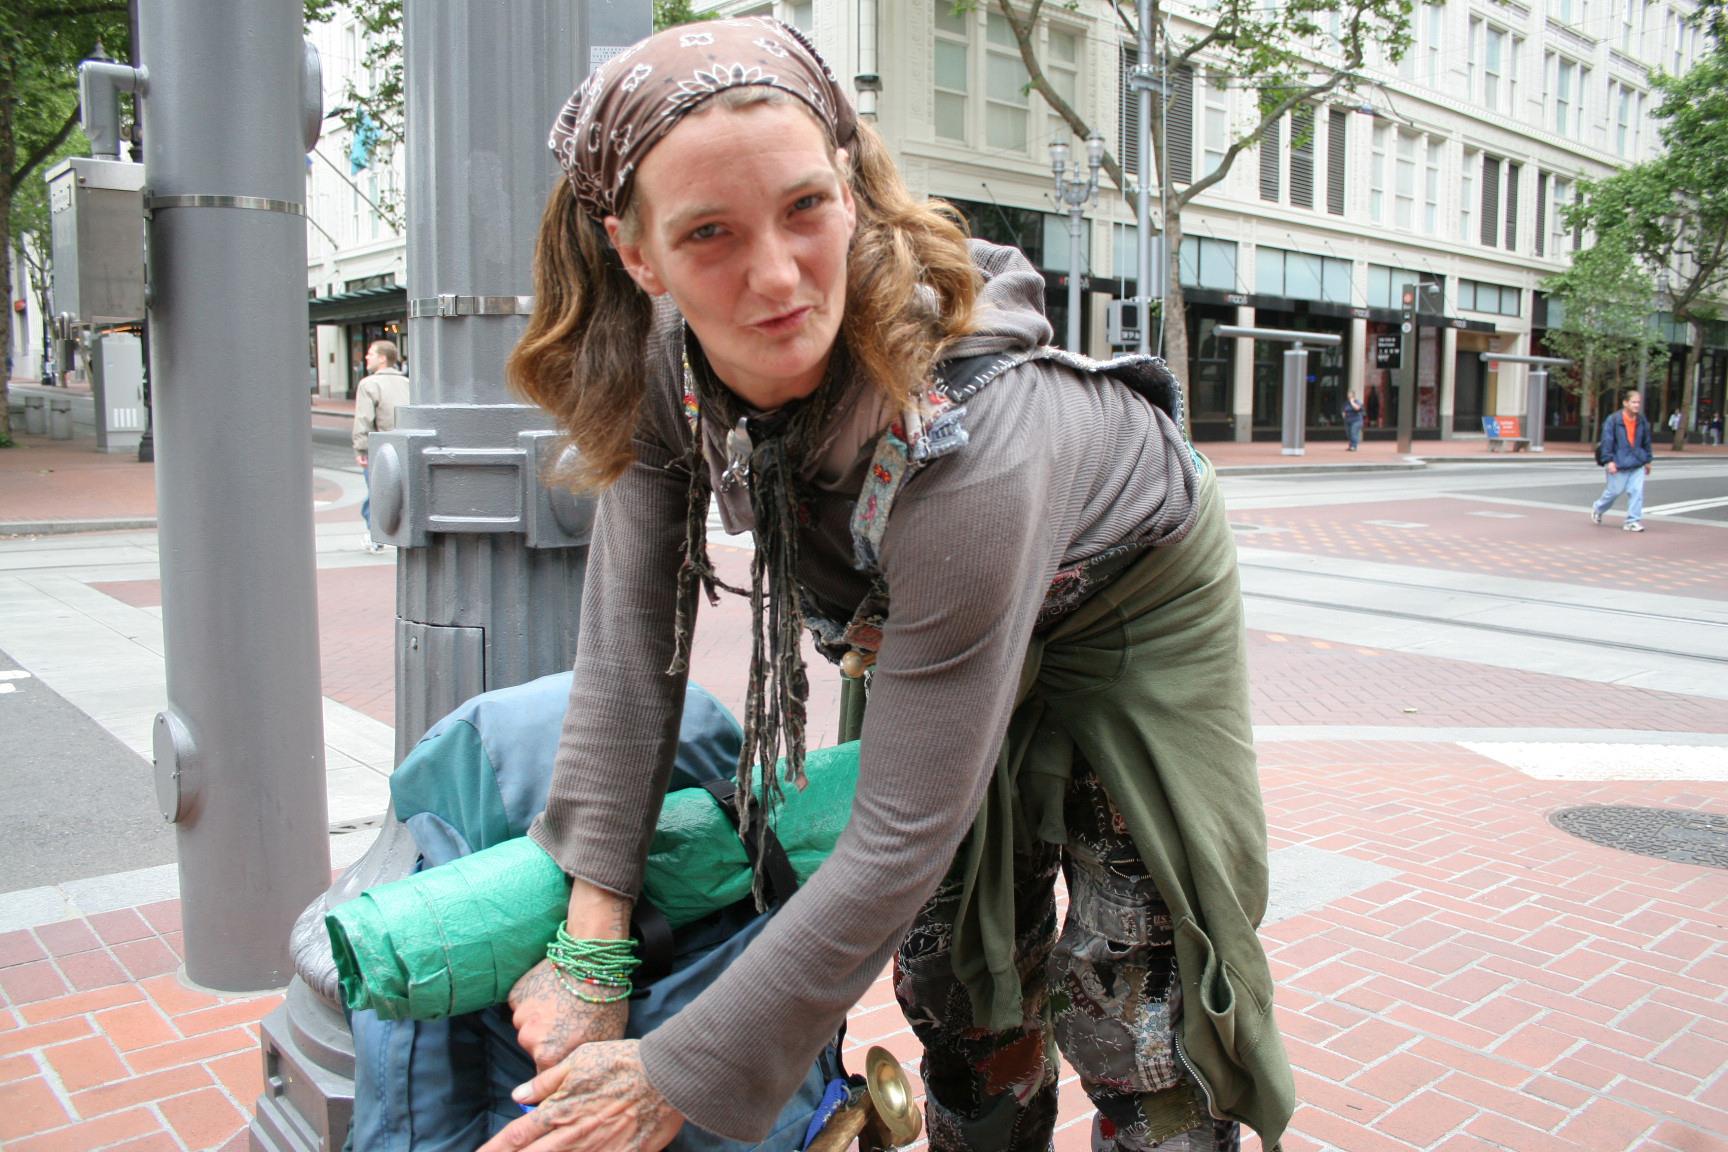 Abby packs up her gear after performing on the corner of SW 5th and SW Morrison in downtown Portland, Oregon. Part of Artful Journey of Life and Redefining Perceptions of Homeless and Poverty by Mary Anne Funk